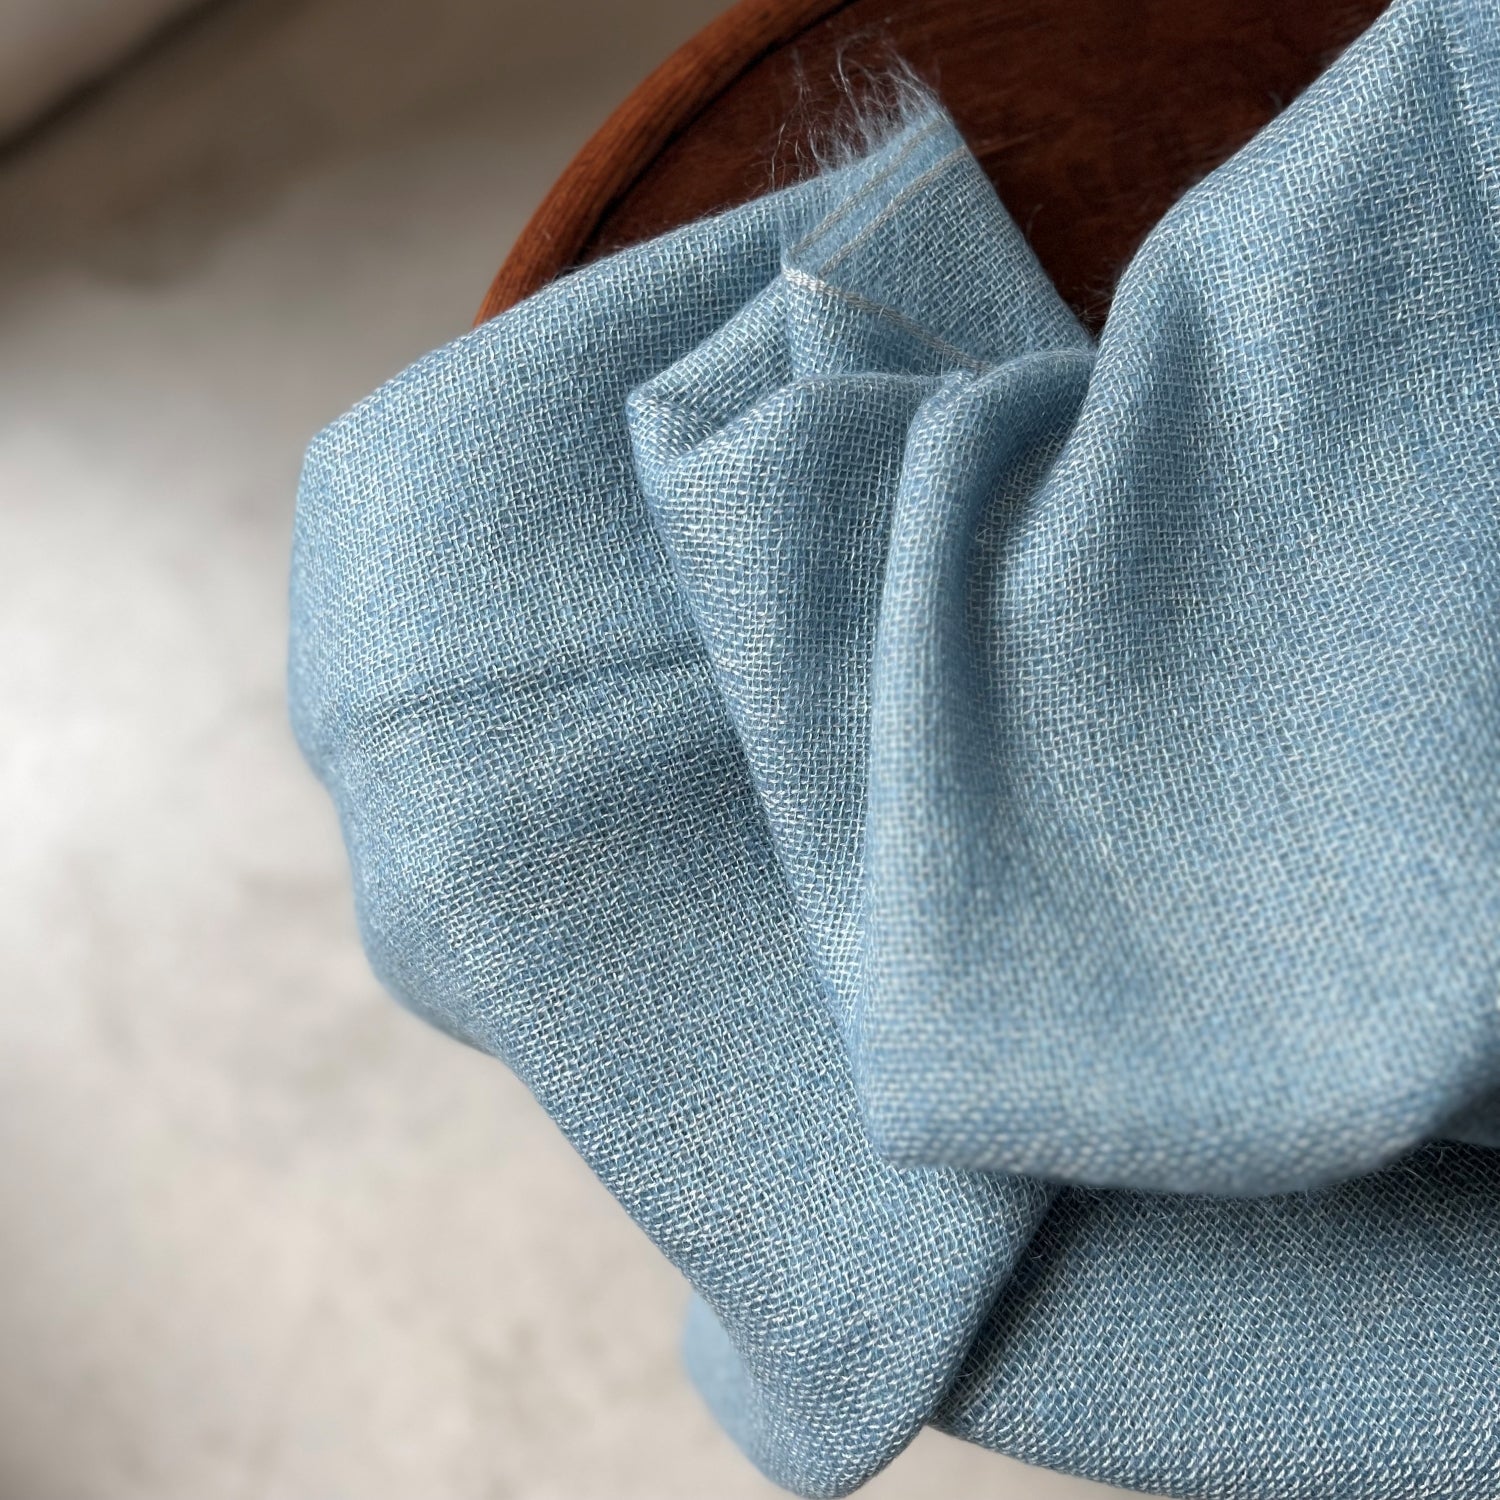 Handwoven Cashmere throw in sky blue 145x210 cm